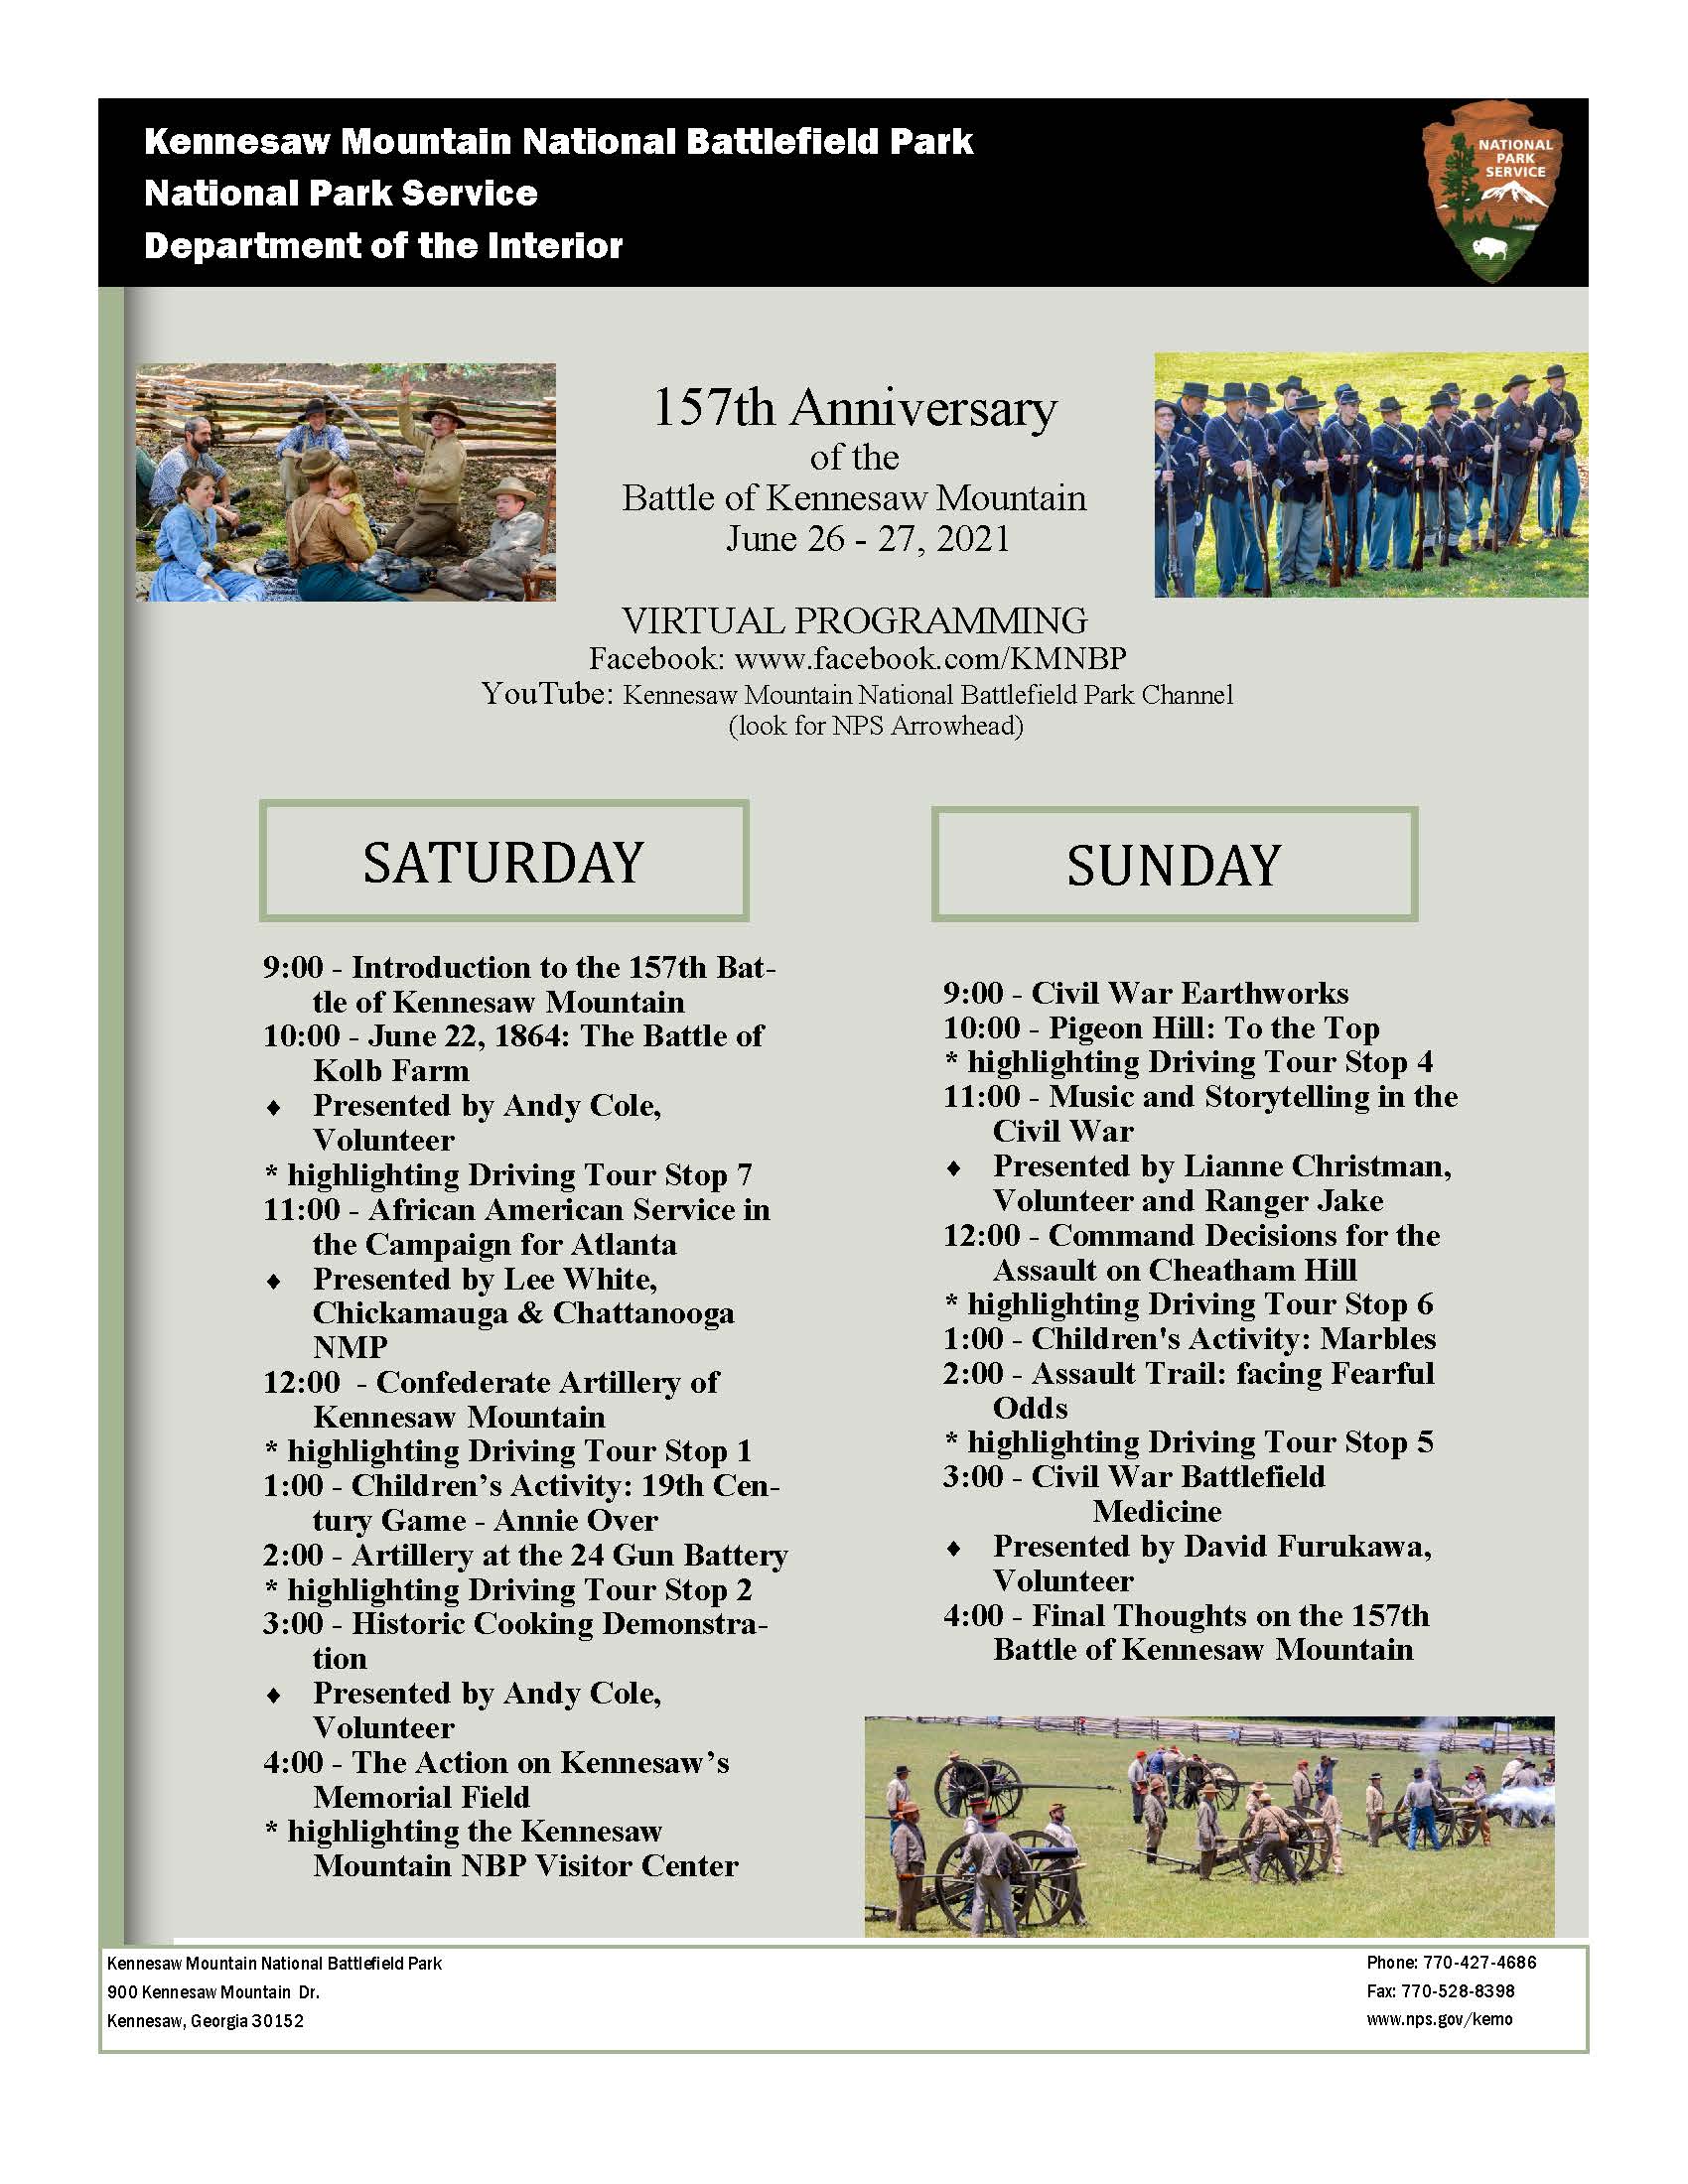 This is an image detailing the events of the 157th battle anniversary of Kennesaw Mountain